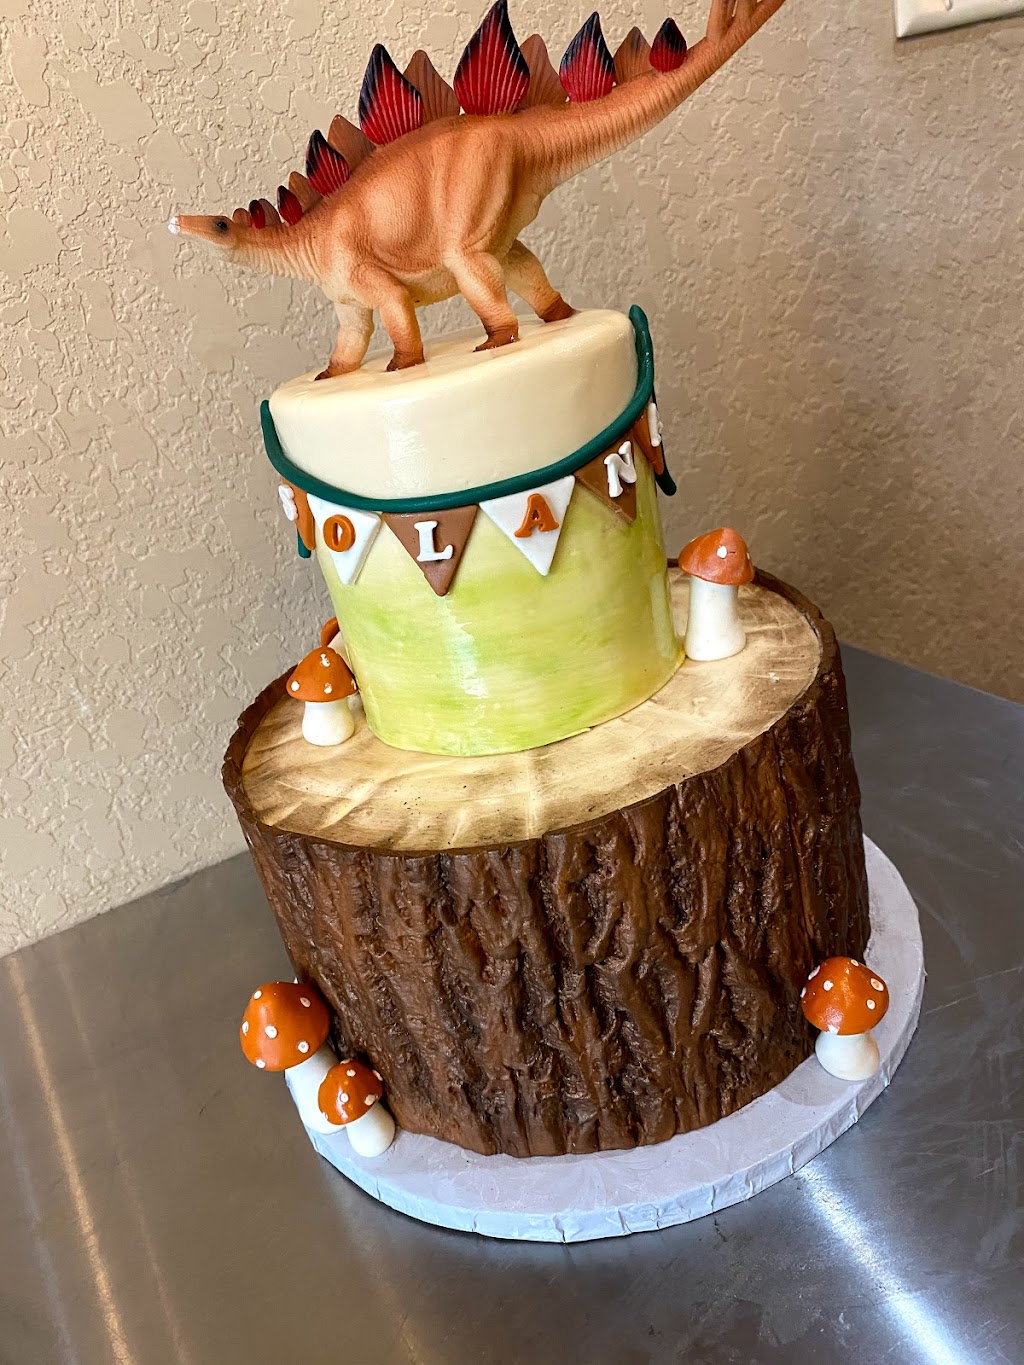 Cakes By Danielle- All About The Cake | 1050 Carolyn Cove, New Braunfels, TX 78130, USA | Phone: (817) 821-5107